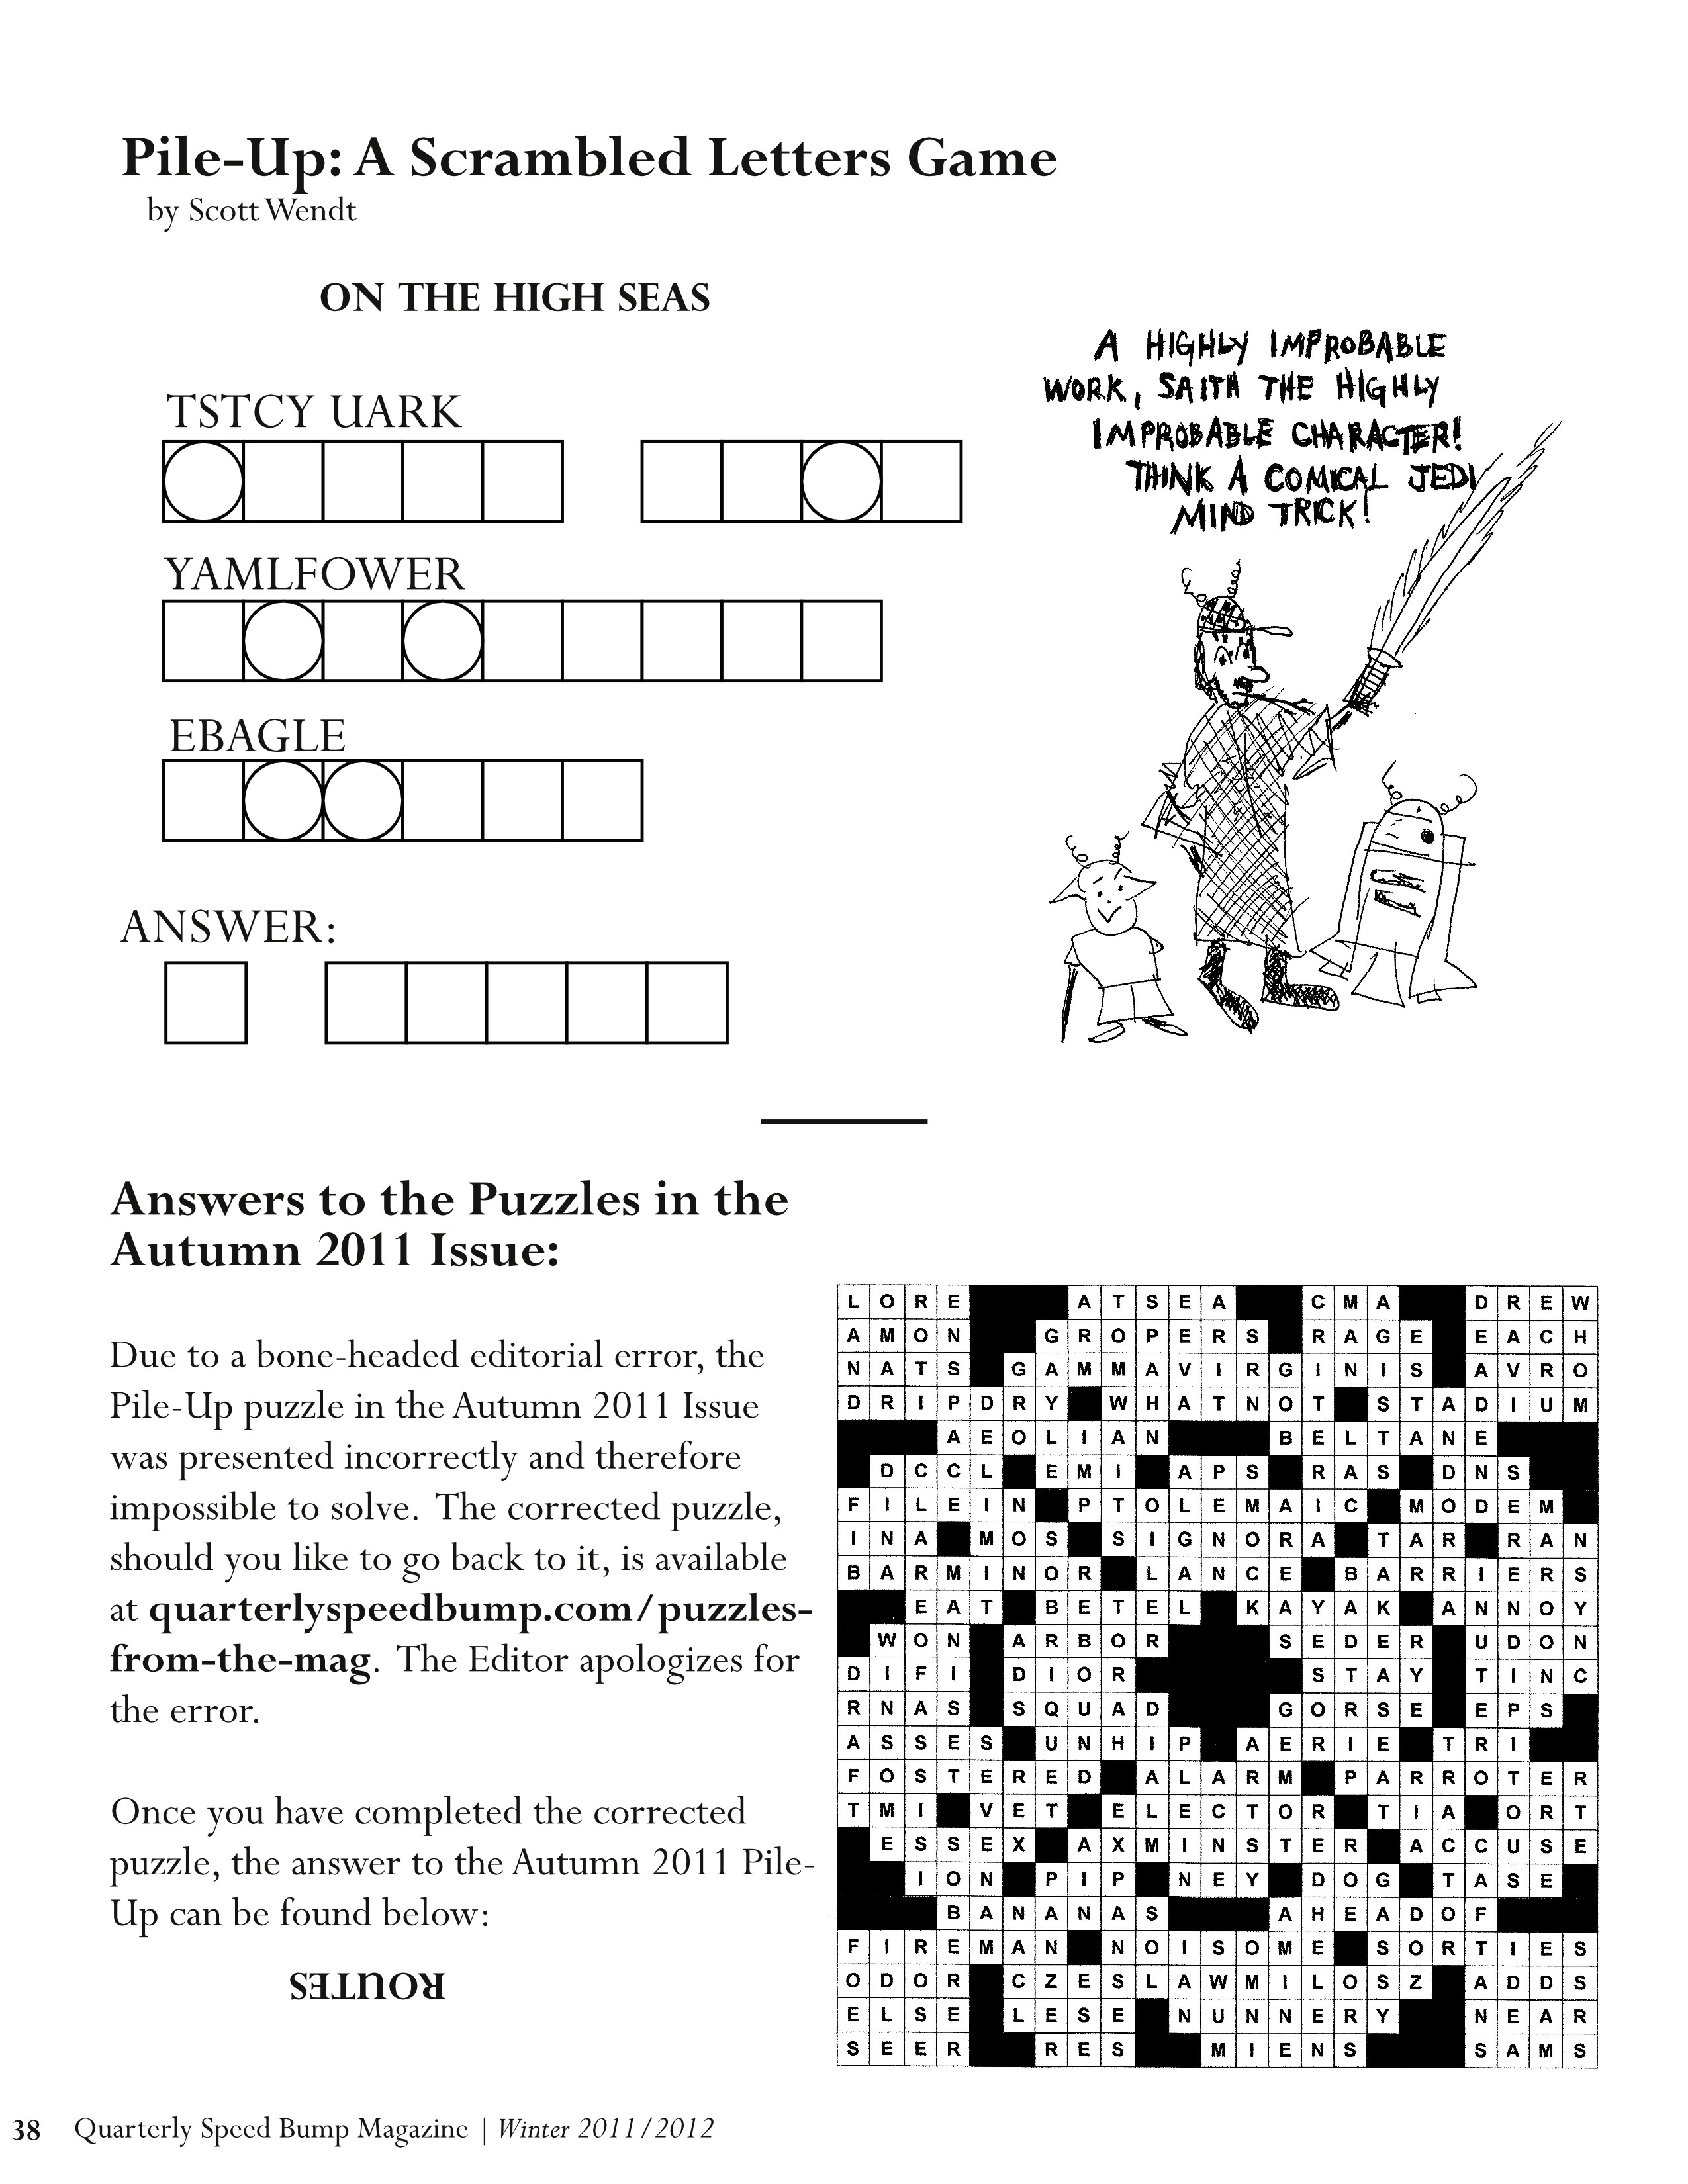 Puzzles from the Mag | Quarterly Speed Bump Magazine